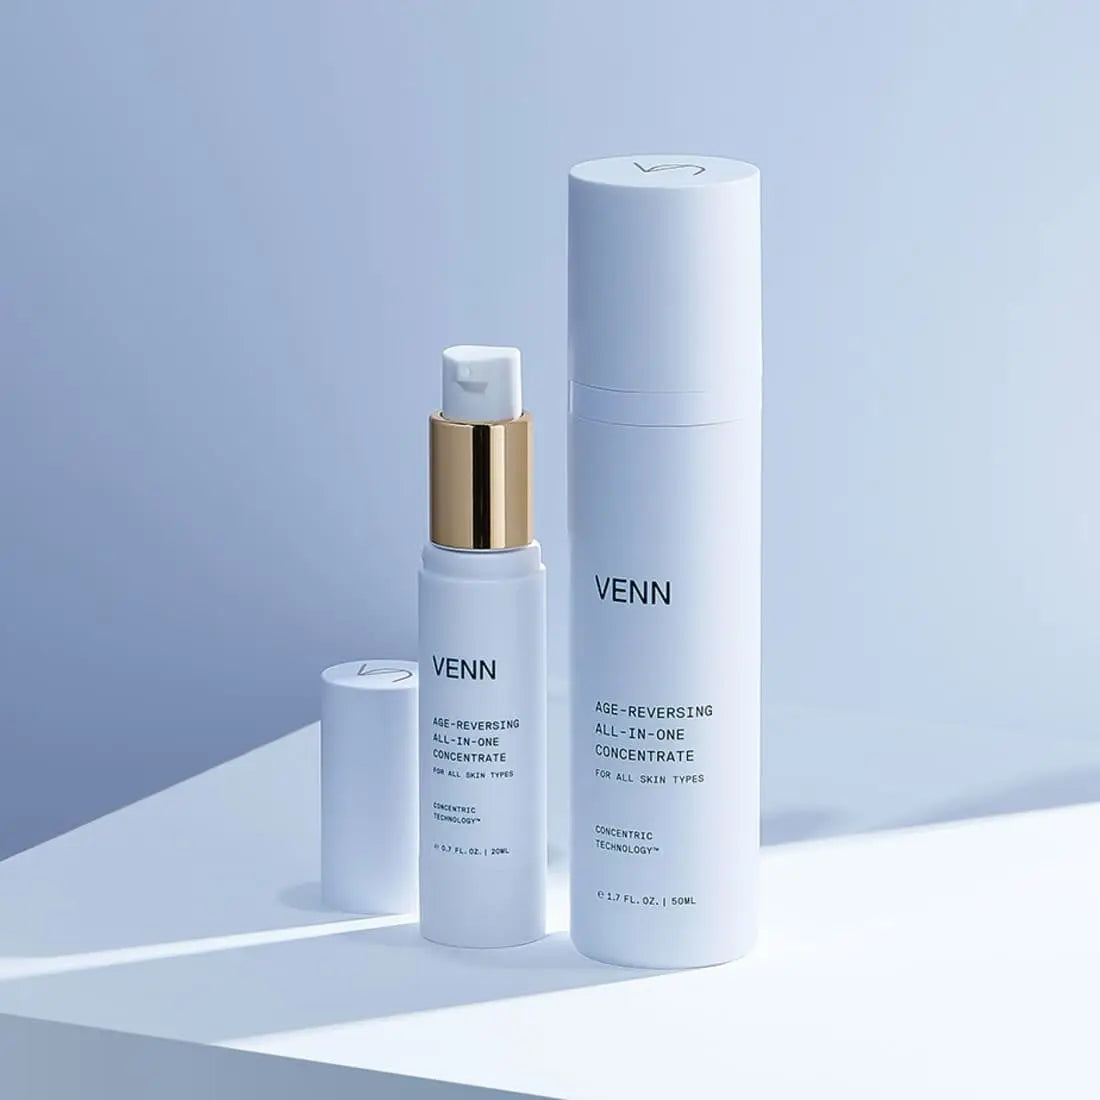 Venn Age-Reversing All-In-One Concentrate 50ml